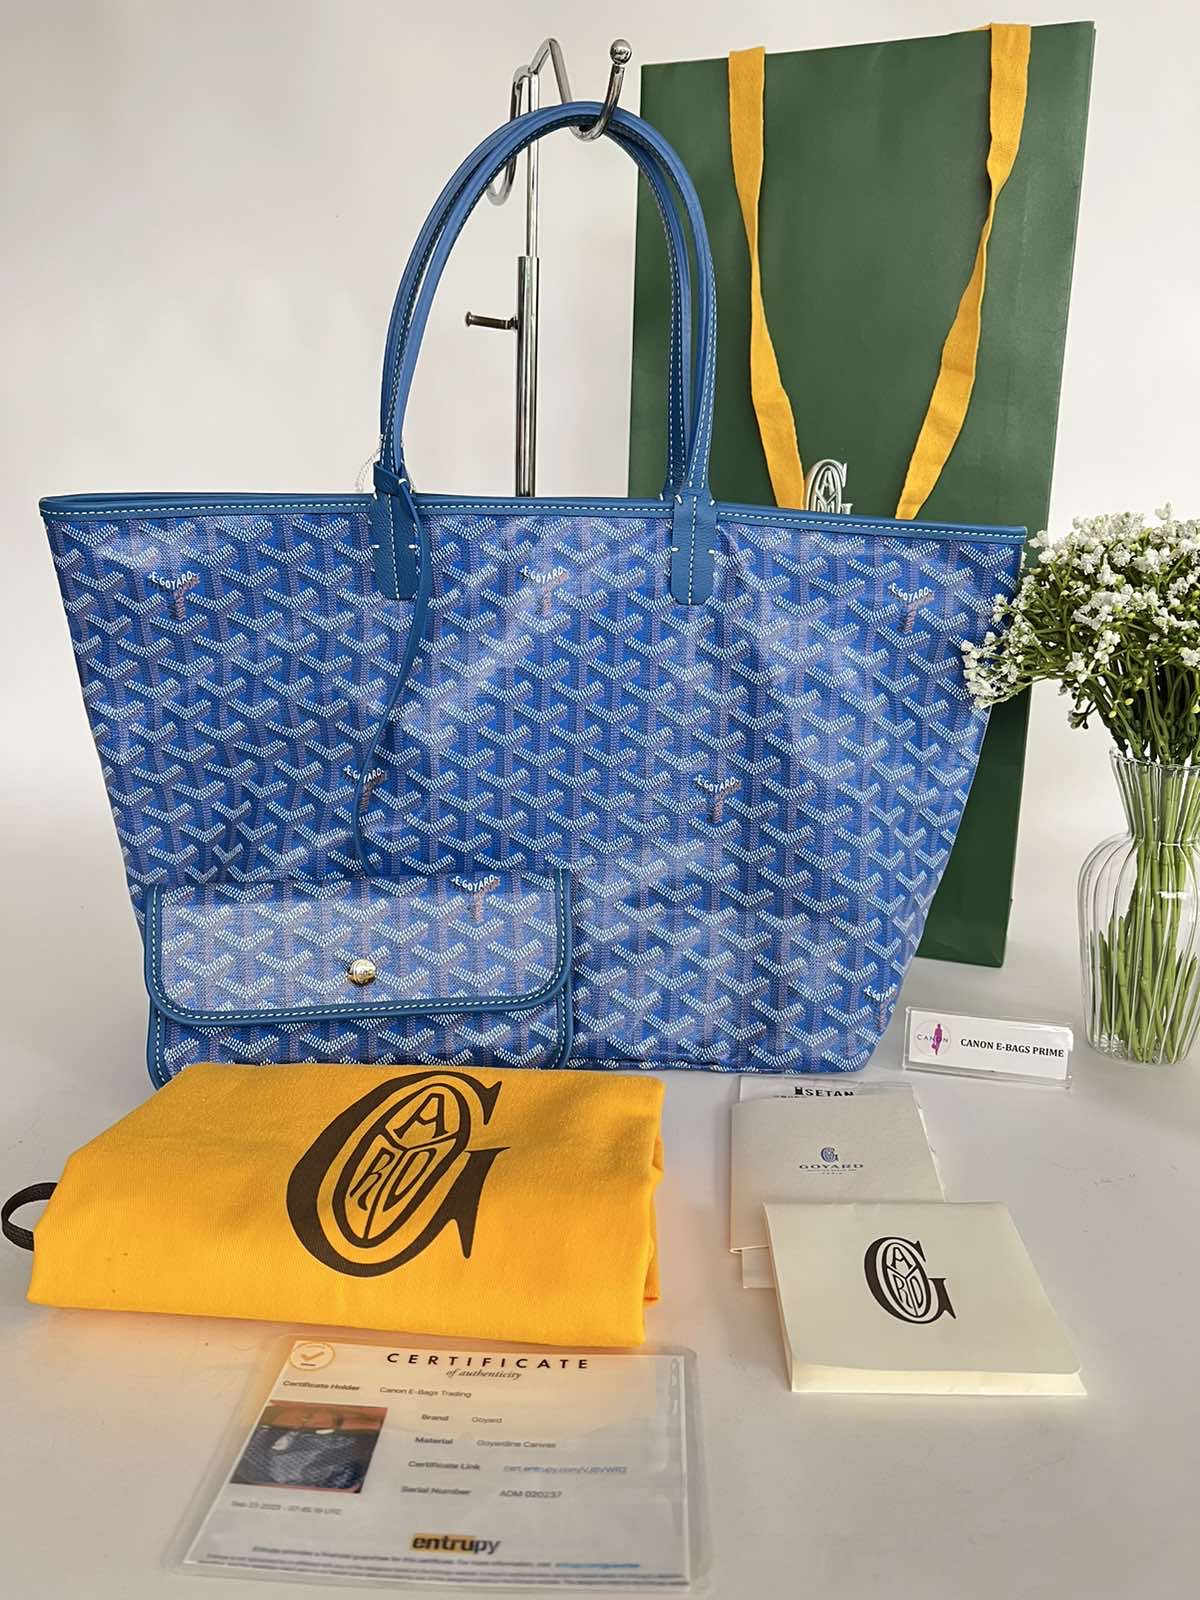 Goyard Rouette Black/Tan. Made in France. With care card, dustbag